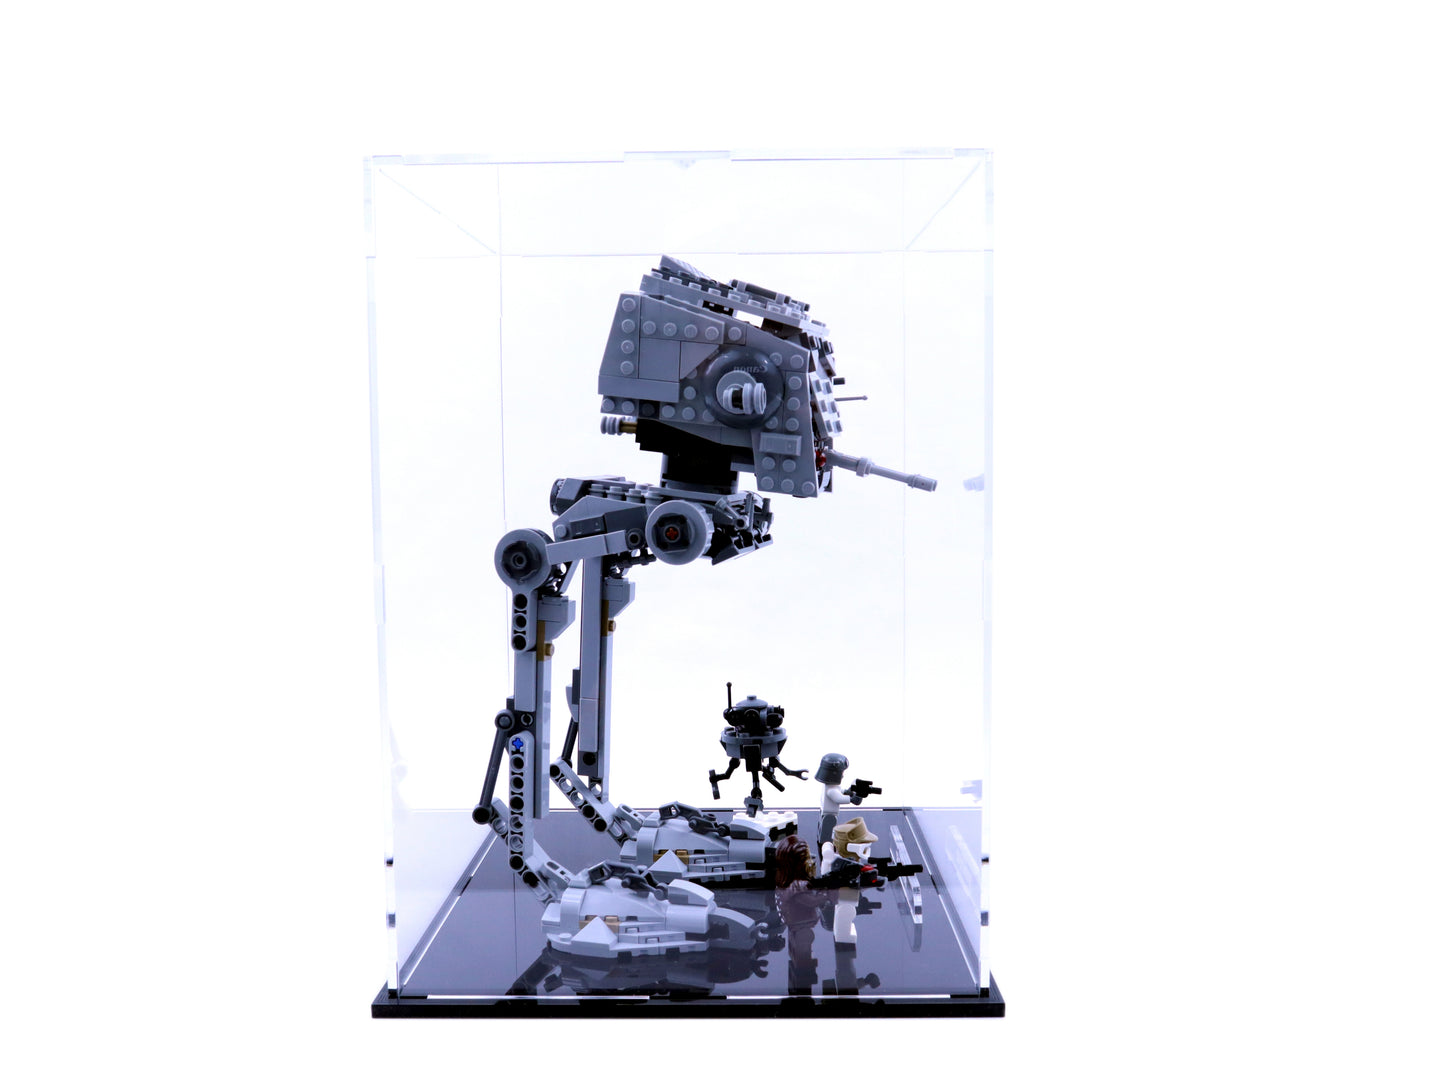 AT-ST™ on Hoth (75322) display stand and showcase